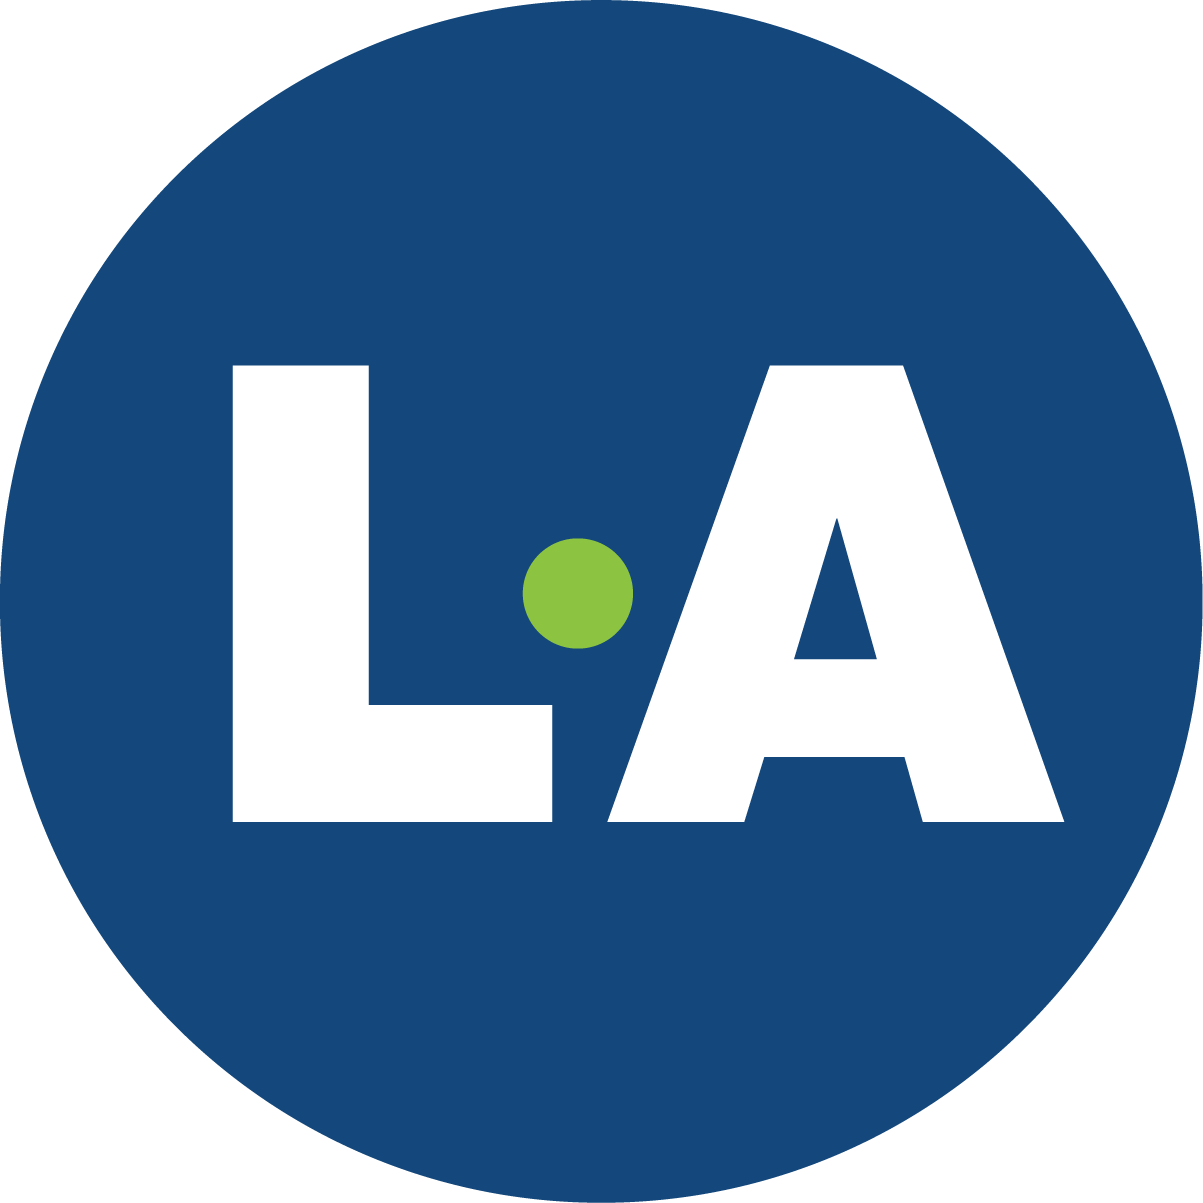 L•A Advertising: An Integrated Marketing & Communications Agency